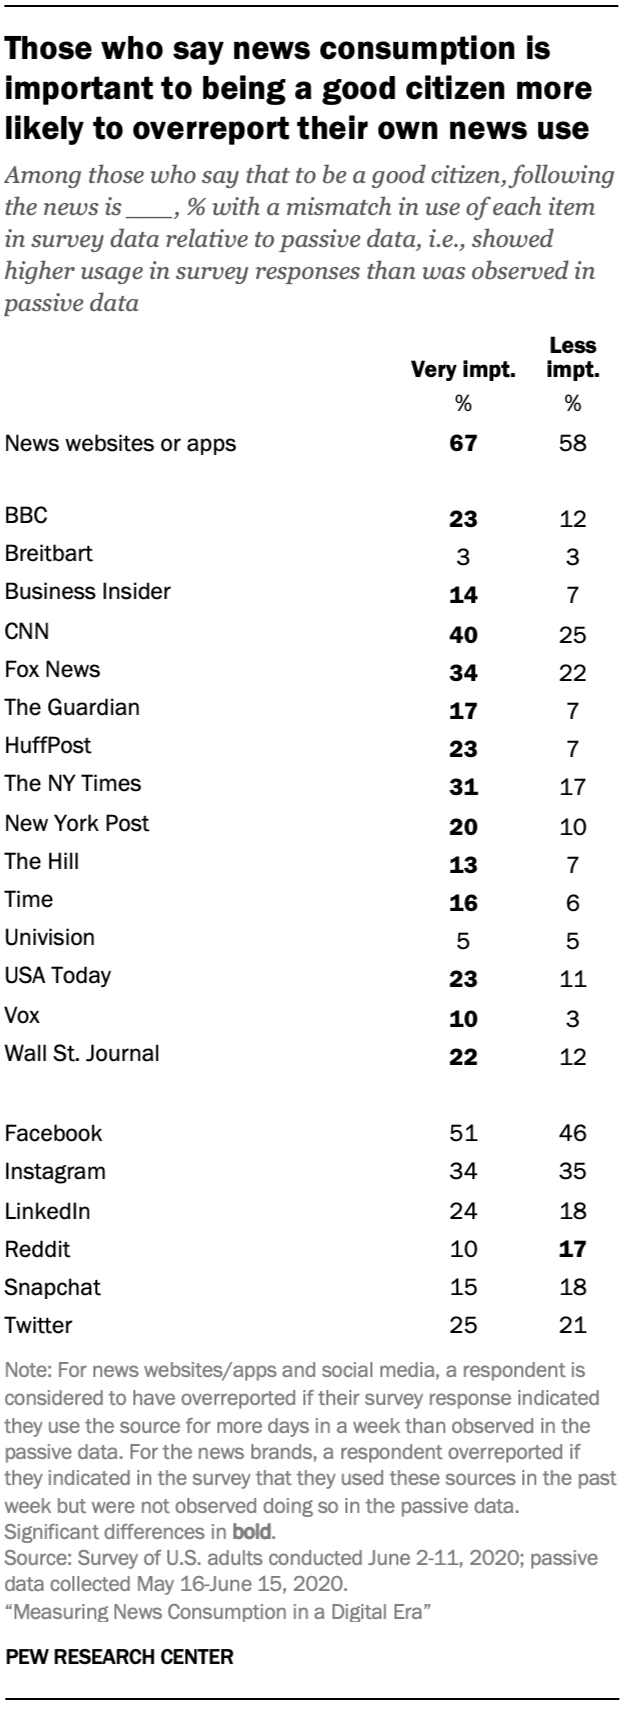 Those who say news consumption is important to being a good citizen more likely to overreport their own news use